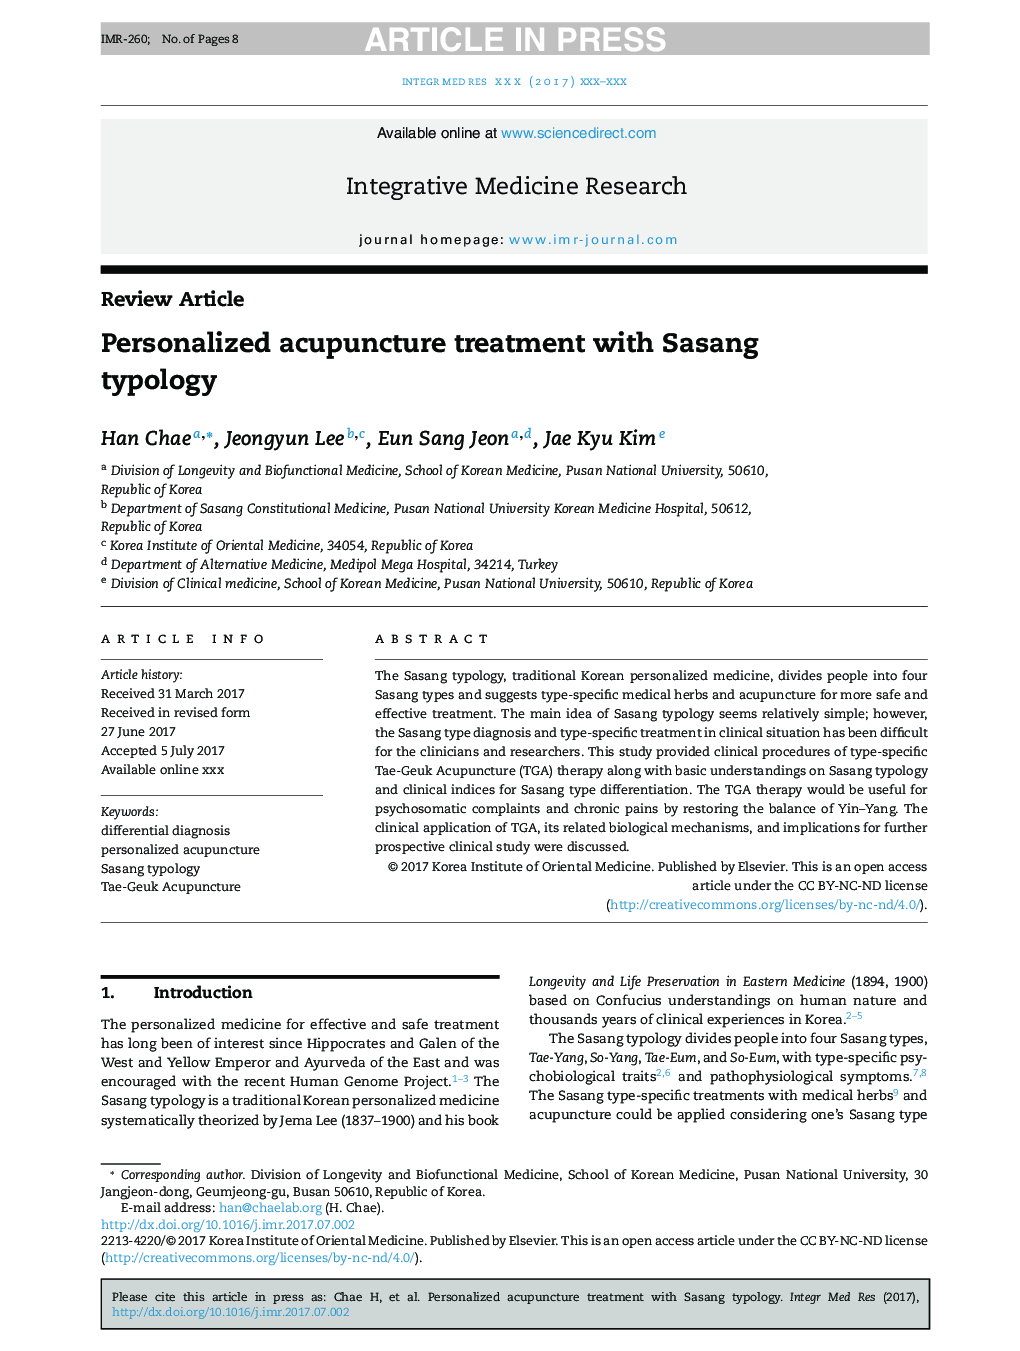 Personalized acupuncture treatment with Sasang typology